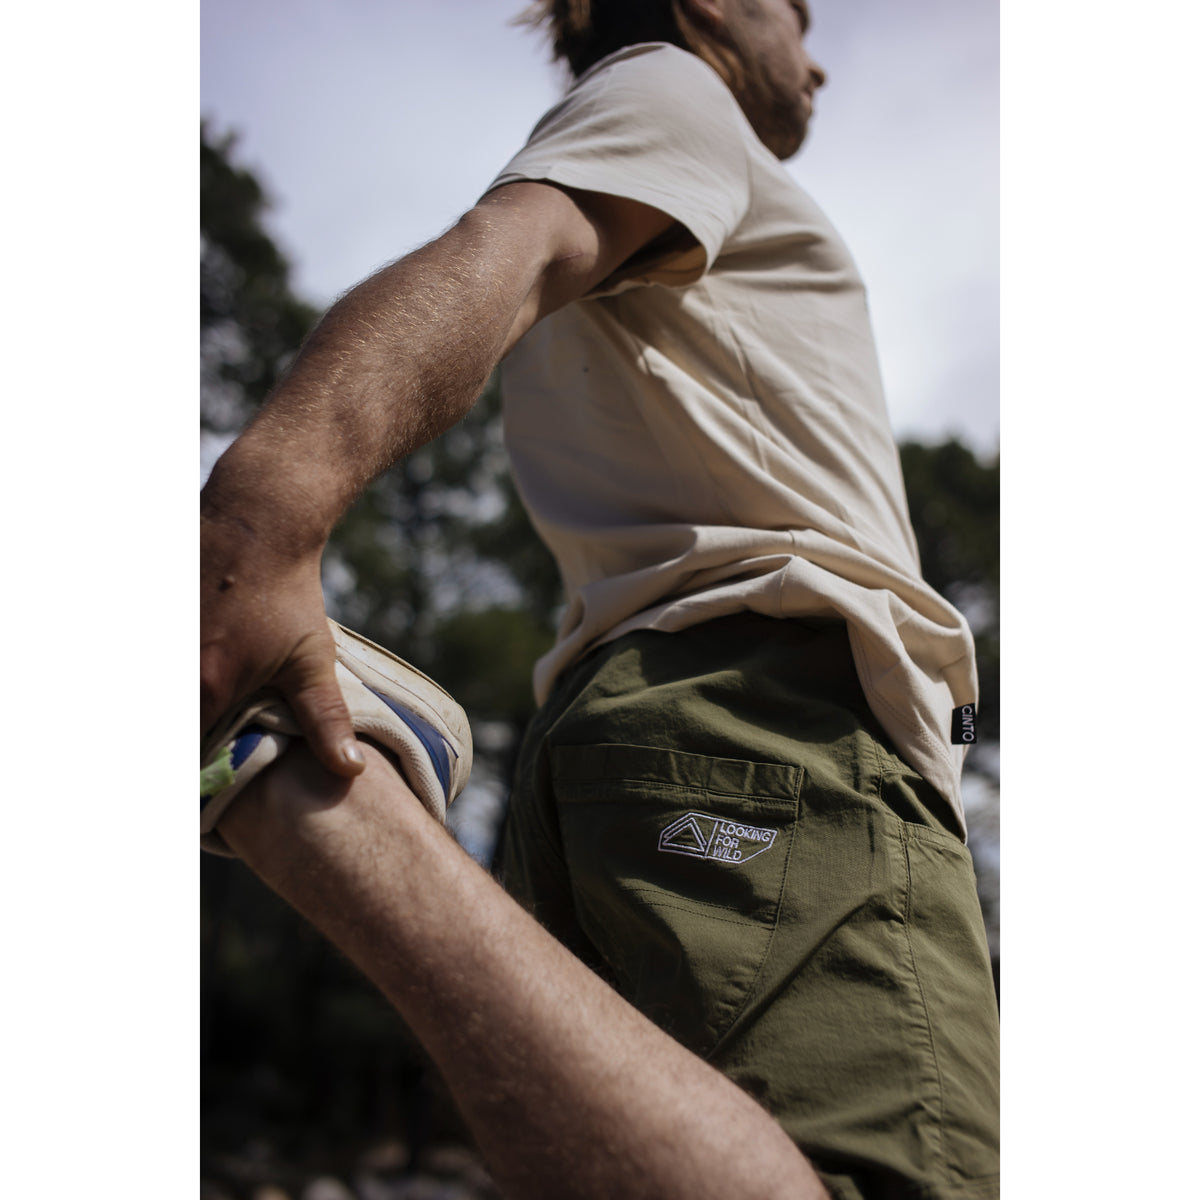 Looking For Wild Cilaos Shorts - Mens (Olive)